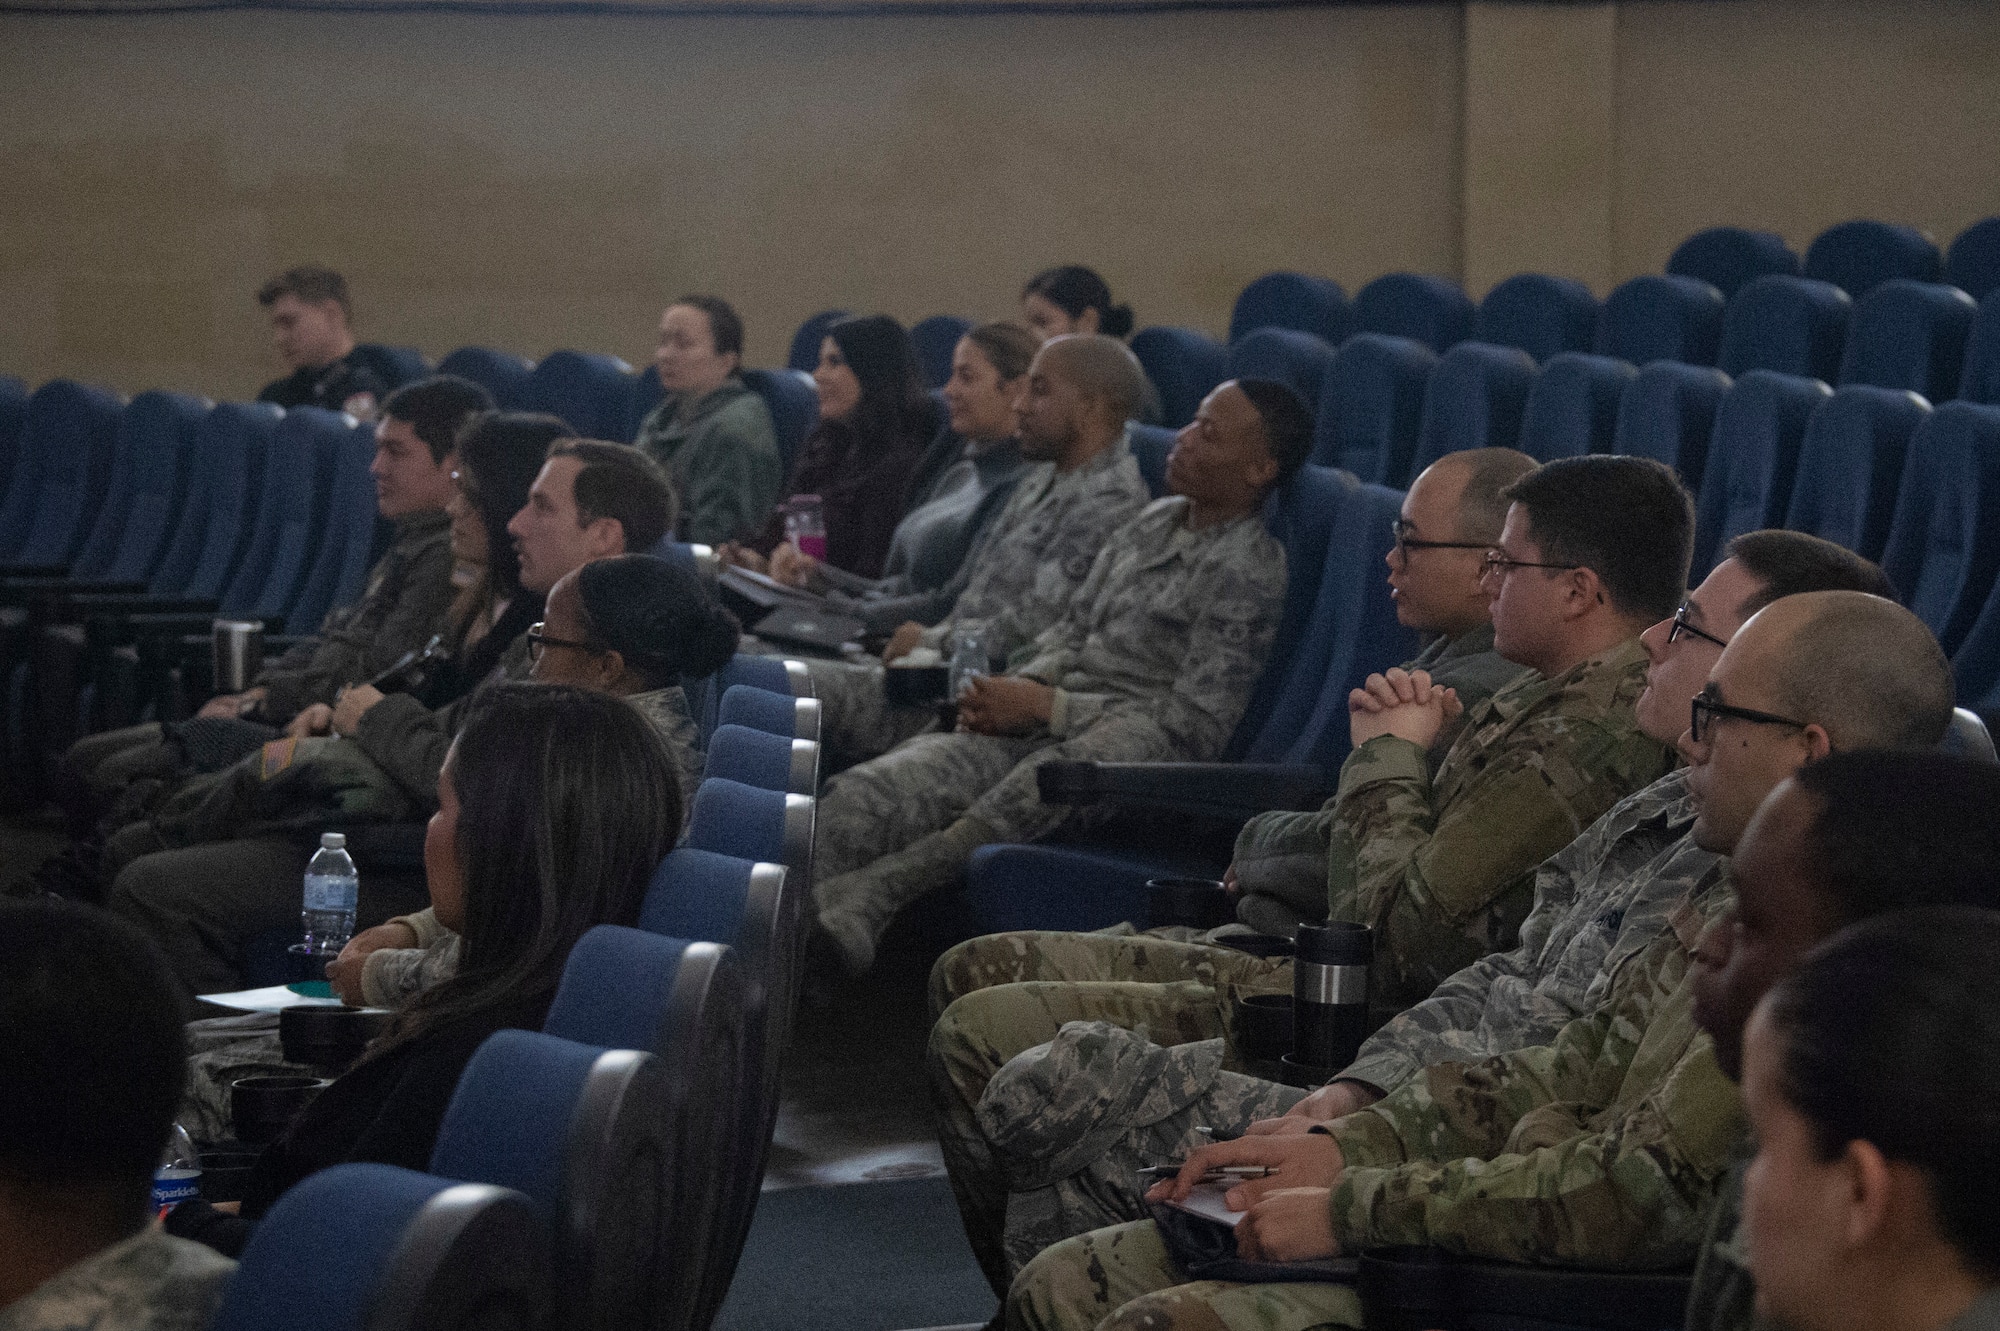 Members of the 97th Air Mobility Wing listen to the Enhancing Human Capitol seminar